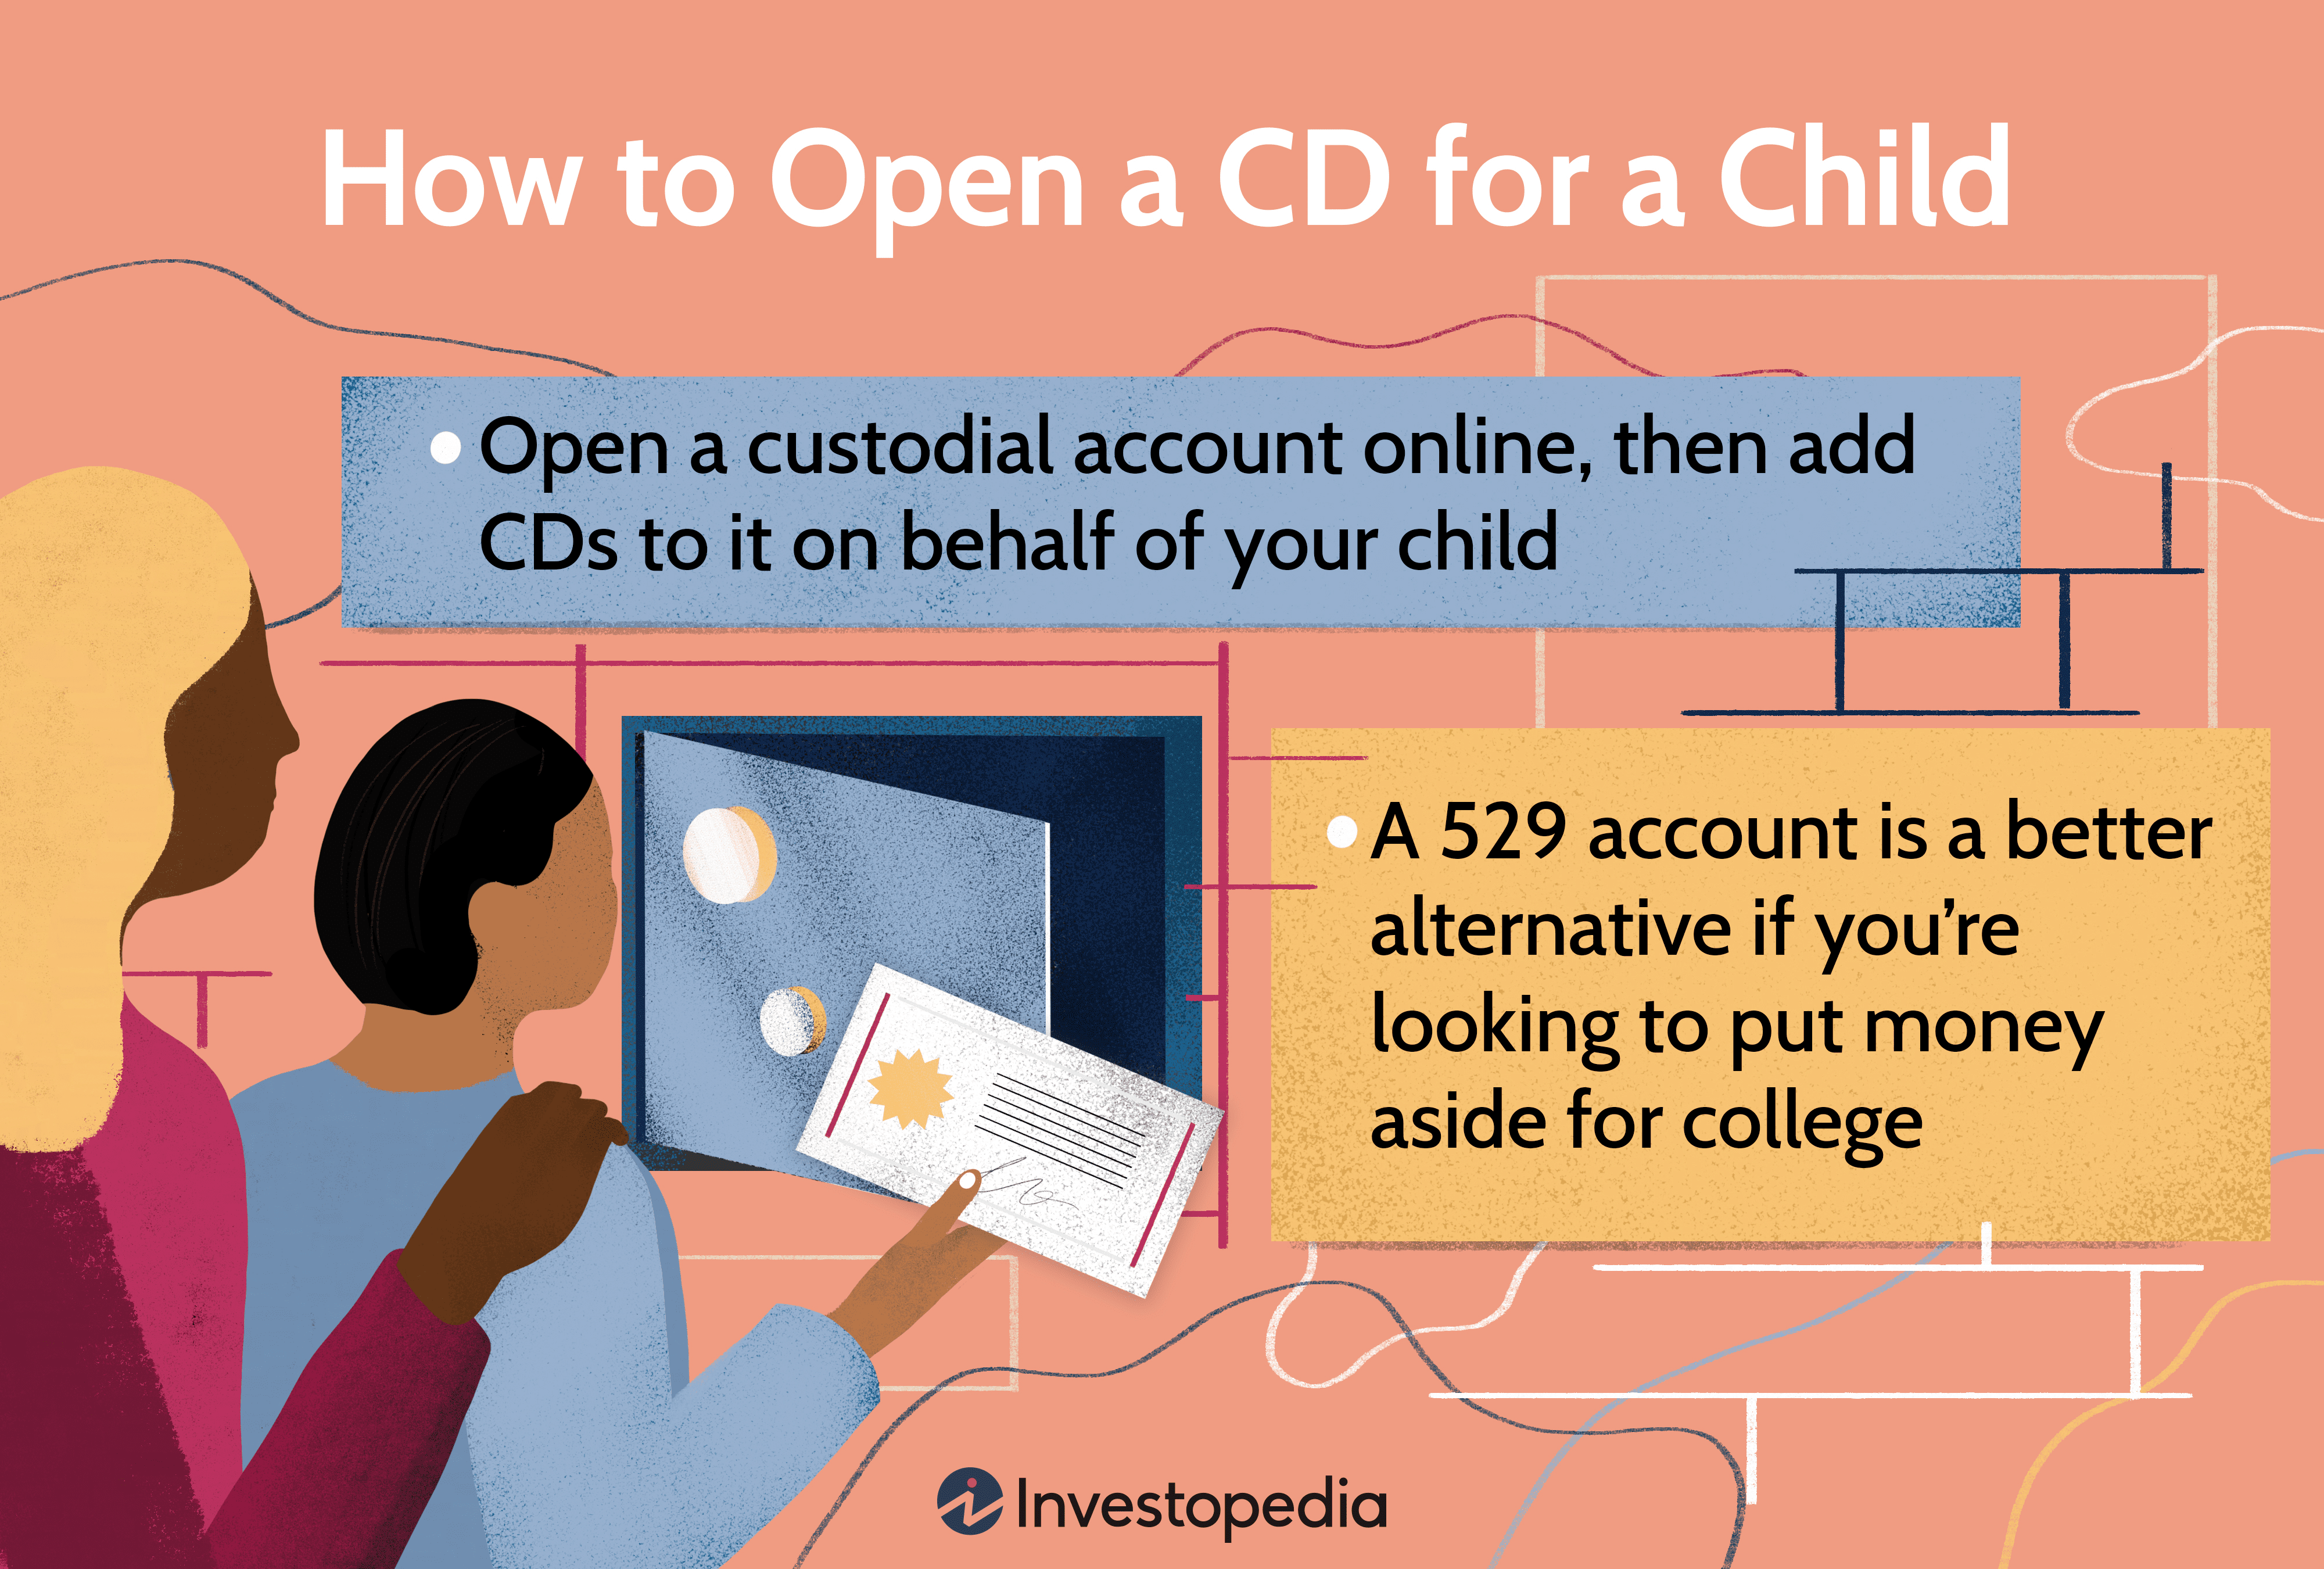 How to Open a CD for a Child